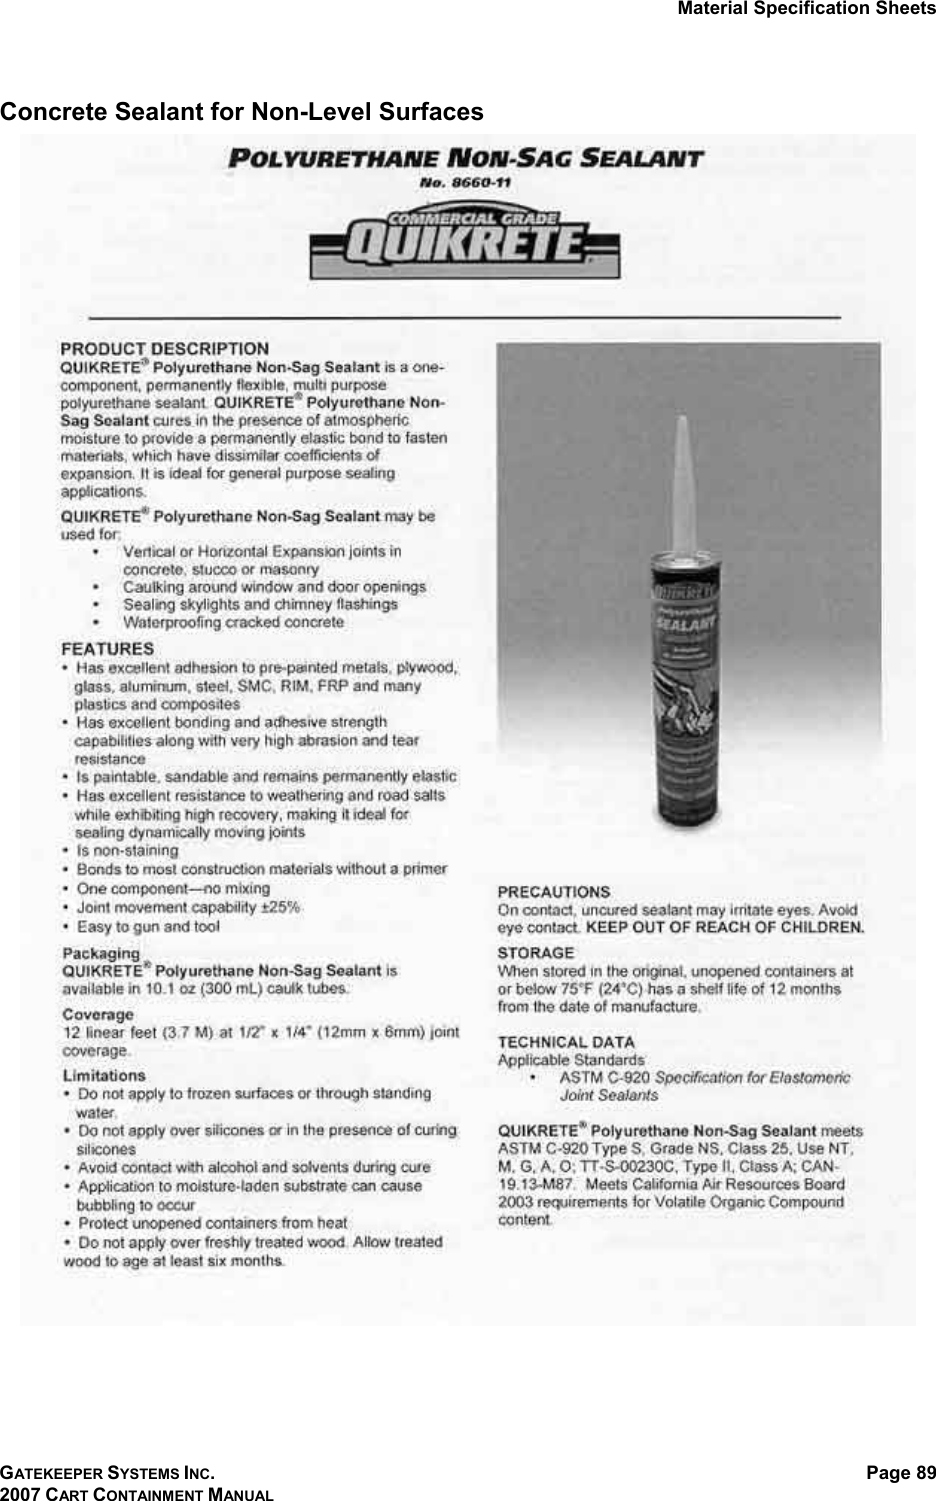 Material Specification Sheets GATEKEEPER SYSTEMS INC. 2007 CART CONTAINMENT MANUAL Page 89  Concrete Sealant for Non-Level Surfaces  